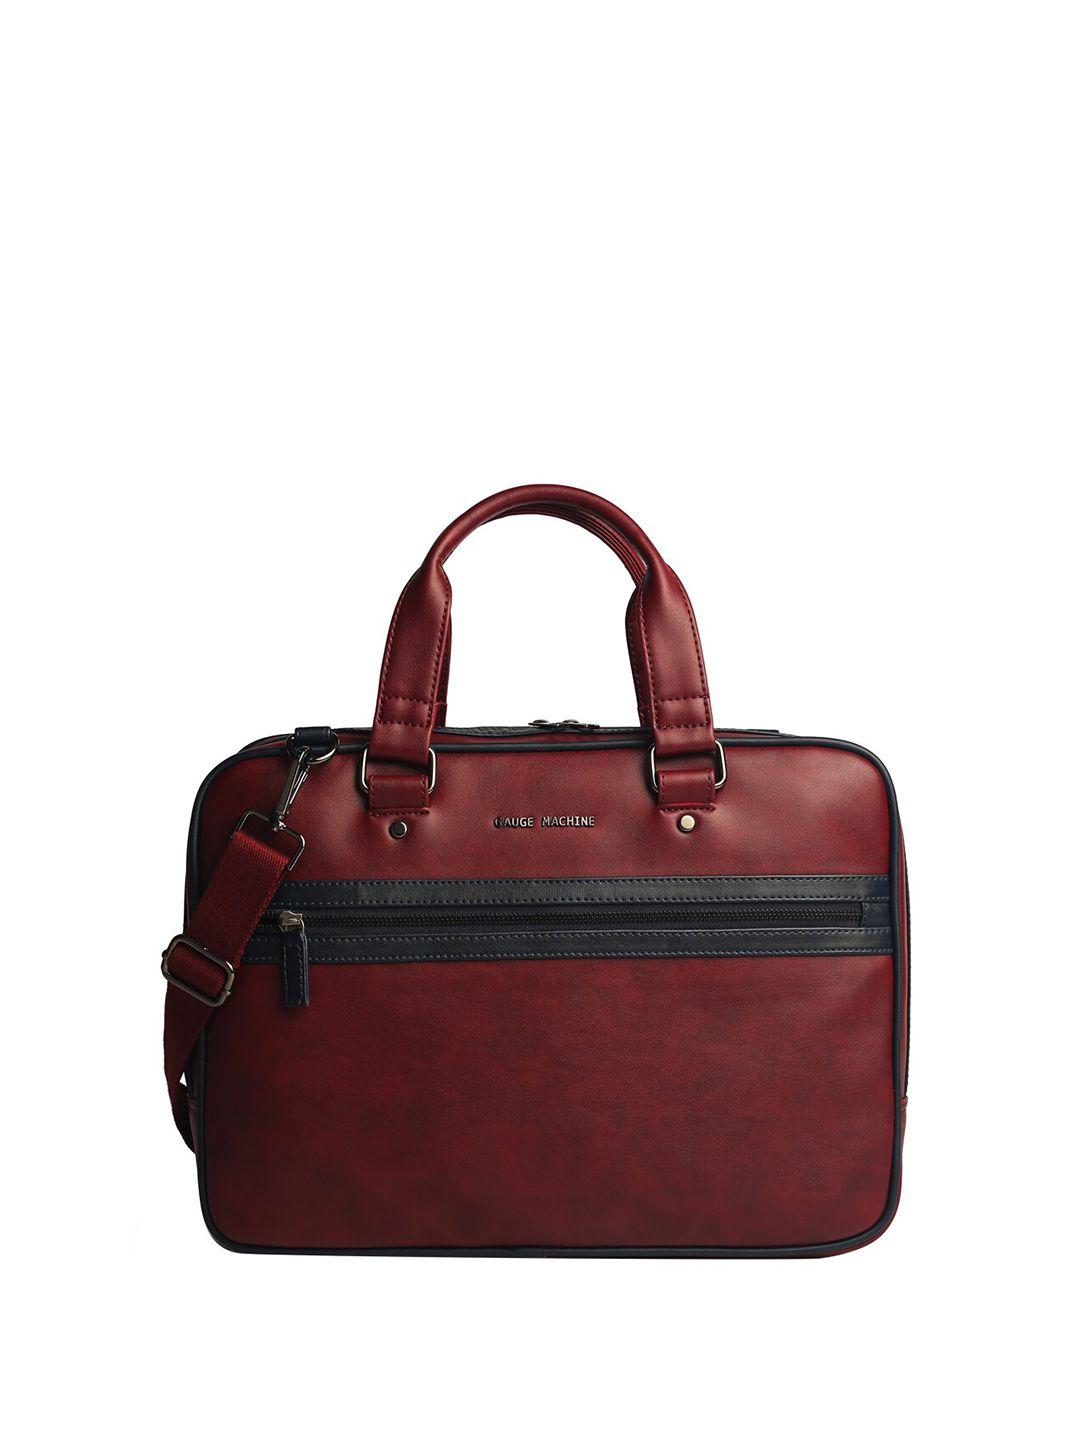 gauge machine unisex leather laptop bag up to 13 inch